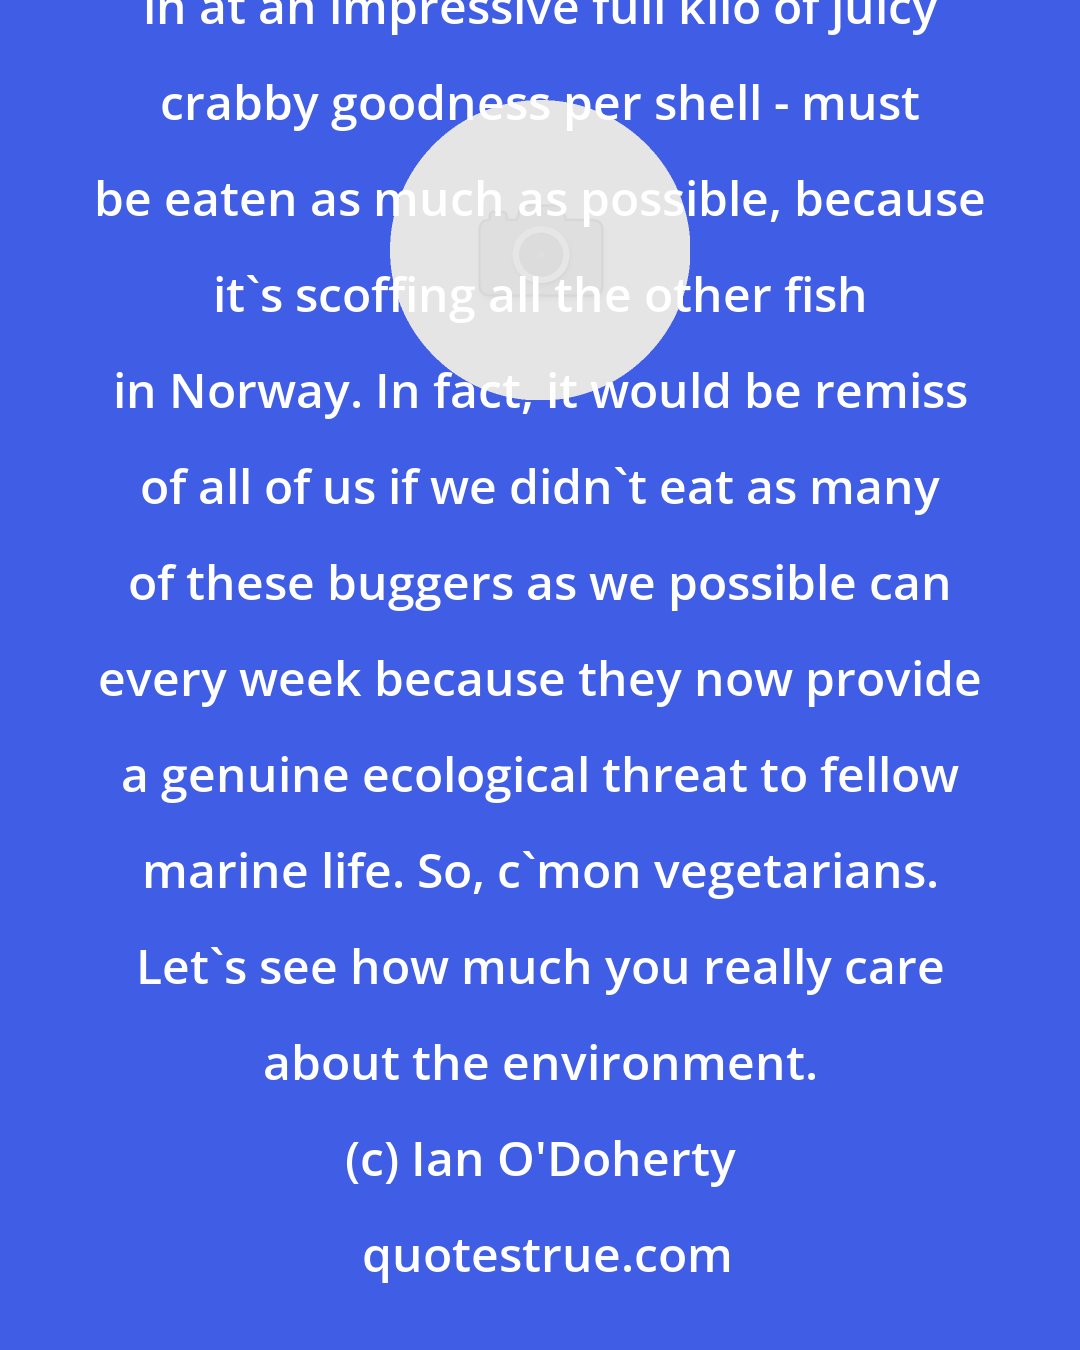 Ian O'Doherty: It turns out that conservationism can be fun, with the news that the Norwegian red king crab - which weighs in at an impressive full kilo of juicy crabby goodness per shell - must be eaten as much as possible, because it's scoffing all the other fish in Norway. In fact, it would be remiss of all of us if we didn't eat as many of these buggers as we possible can every week because they now provide a genuine ecological threat to fellow marine life. So, c'mon vegetarians. Let's see how much you really care about the environment.